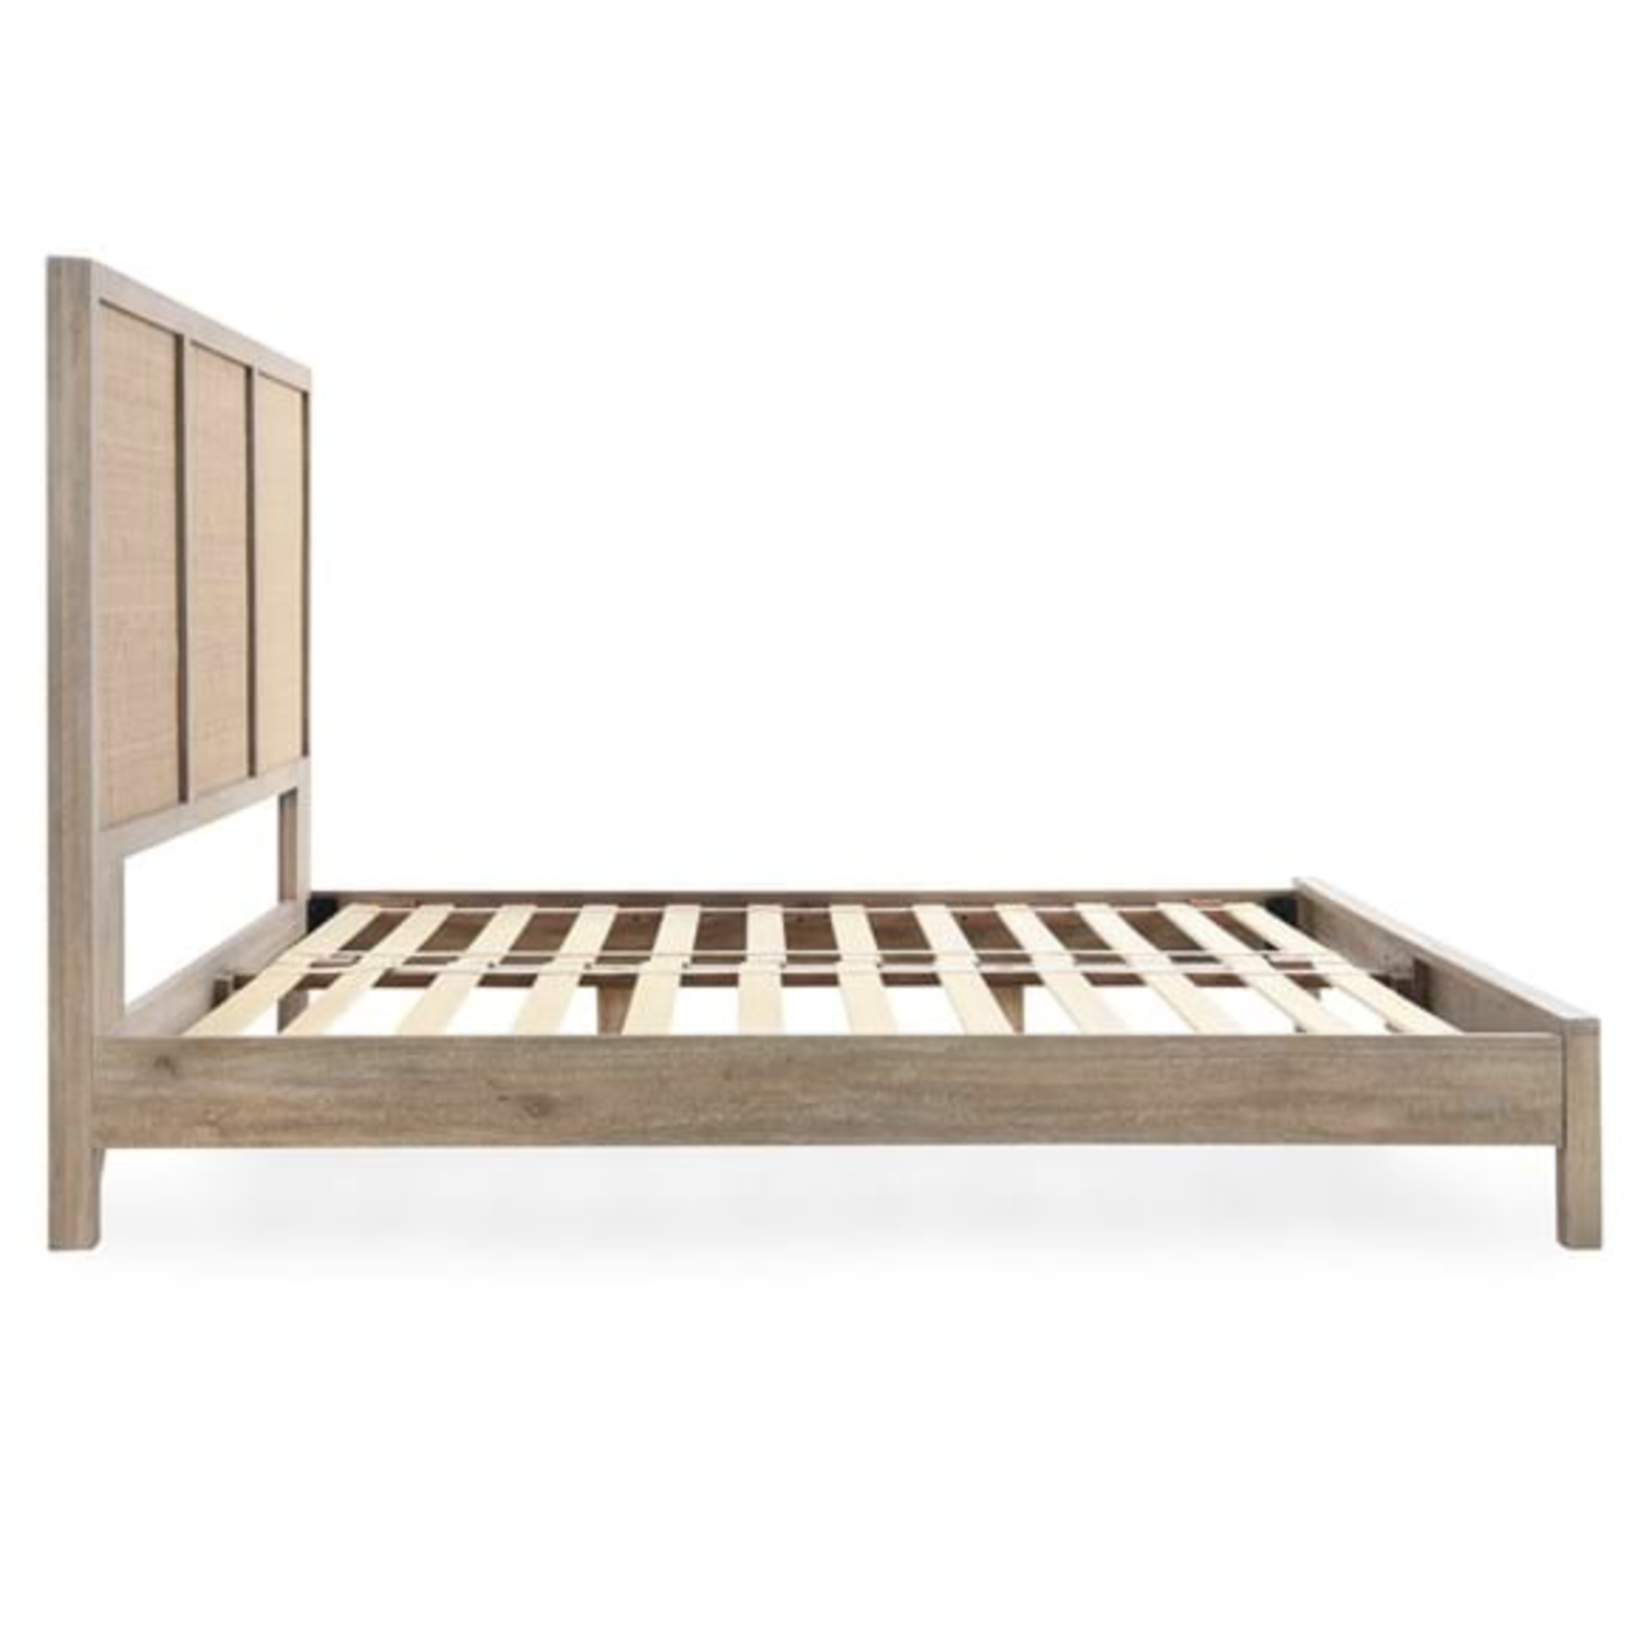 Outside The Box 61x80x54 Jensen Cane & Mango Wood Taupe Queen Bed